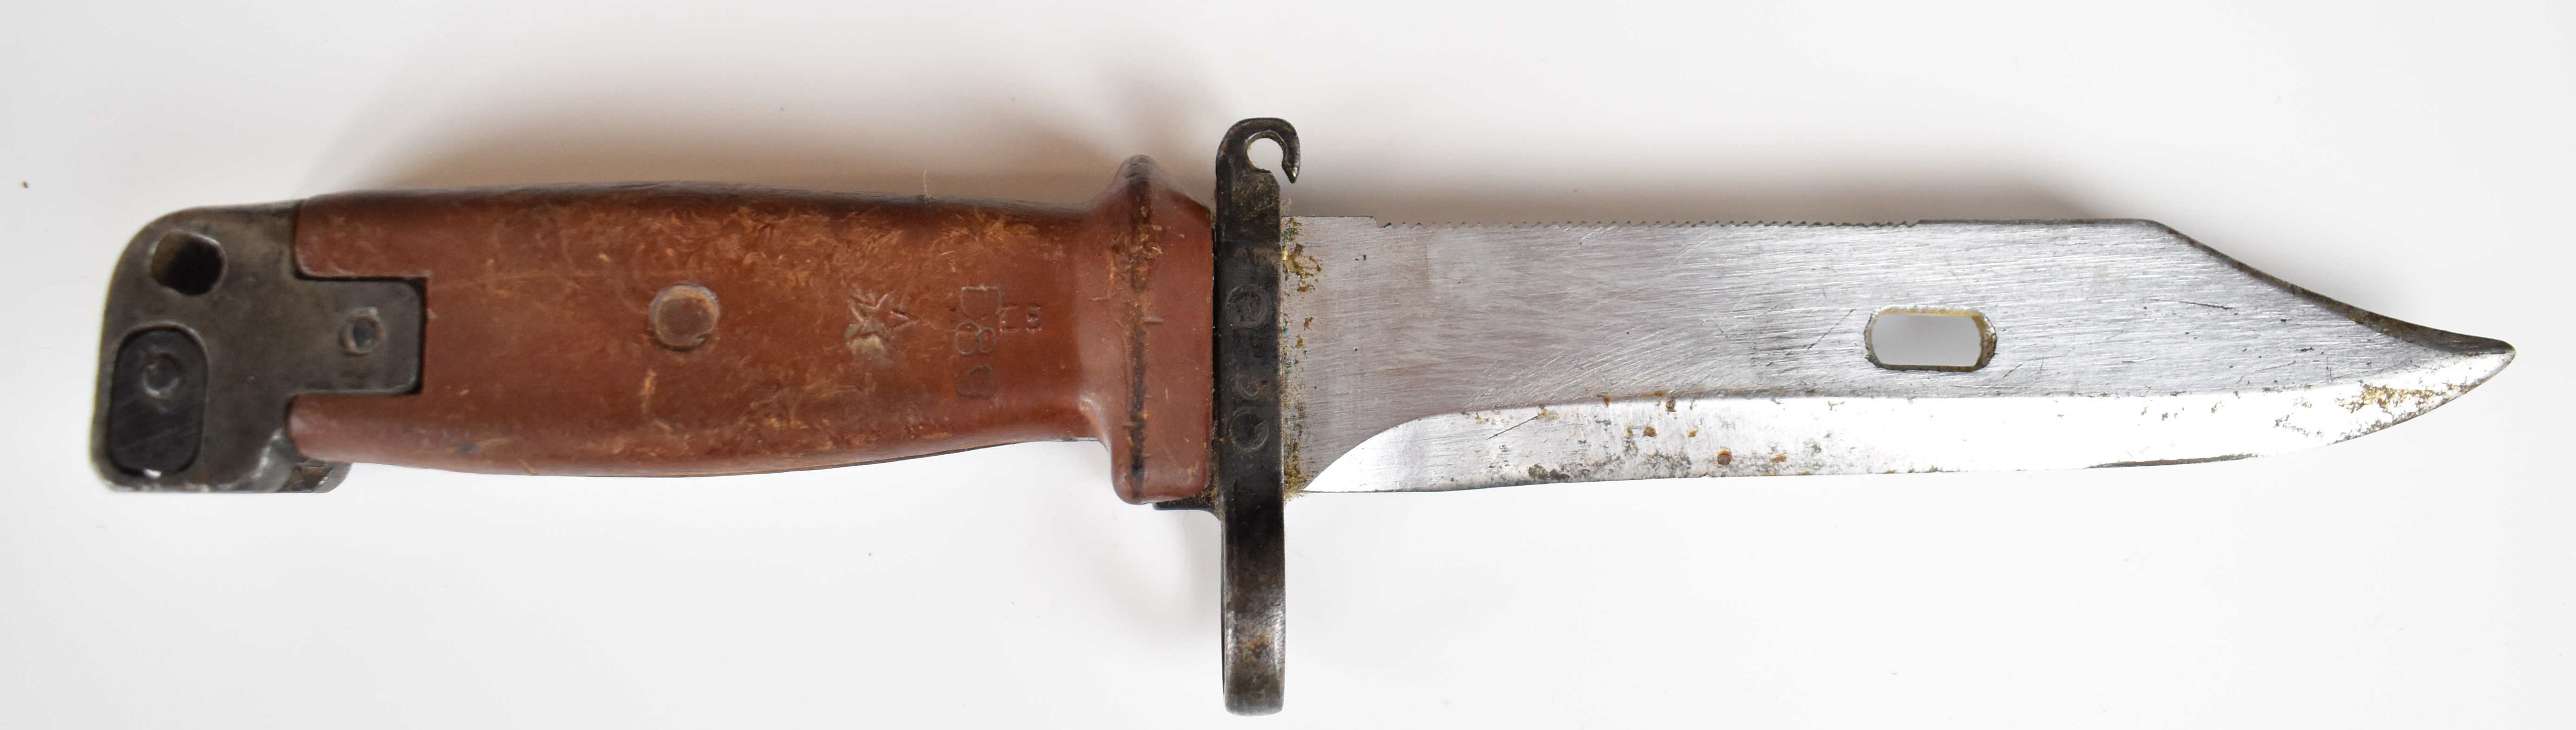 Kalashnikov AK47 bayonet with composite grips stamped 689, 14cm part serrated blade and scabbard, - Image 2 of 10